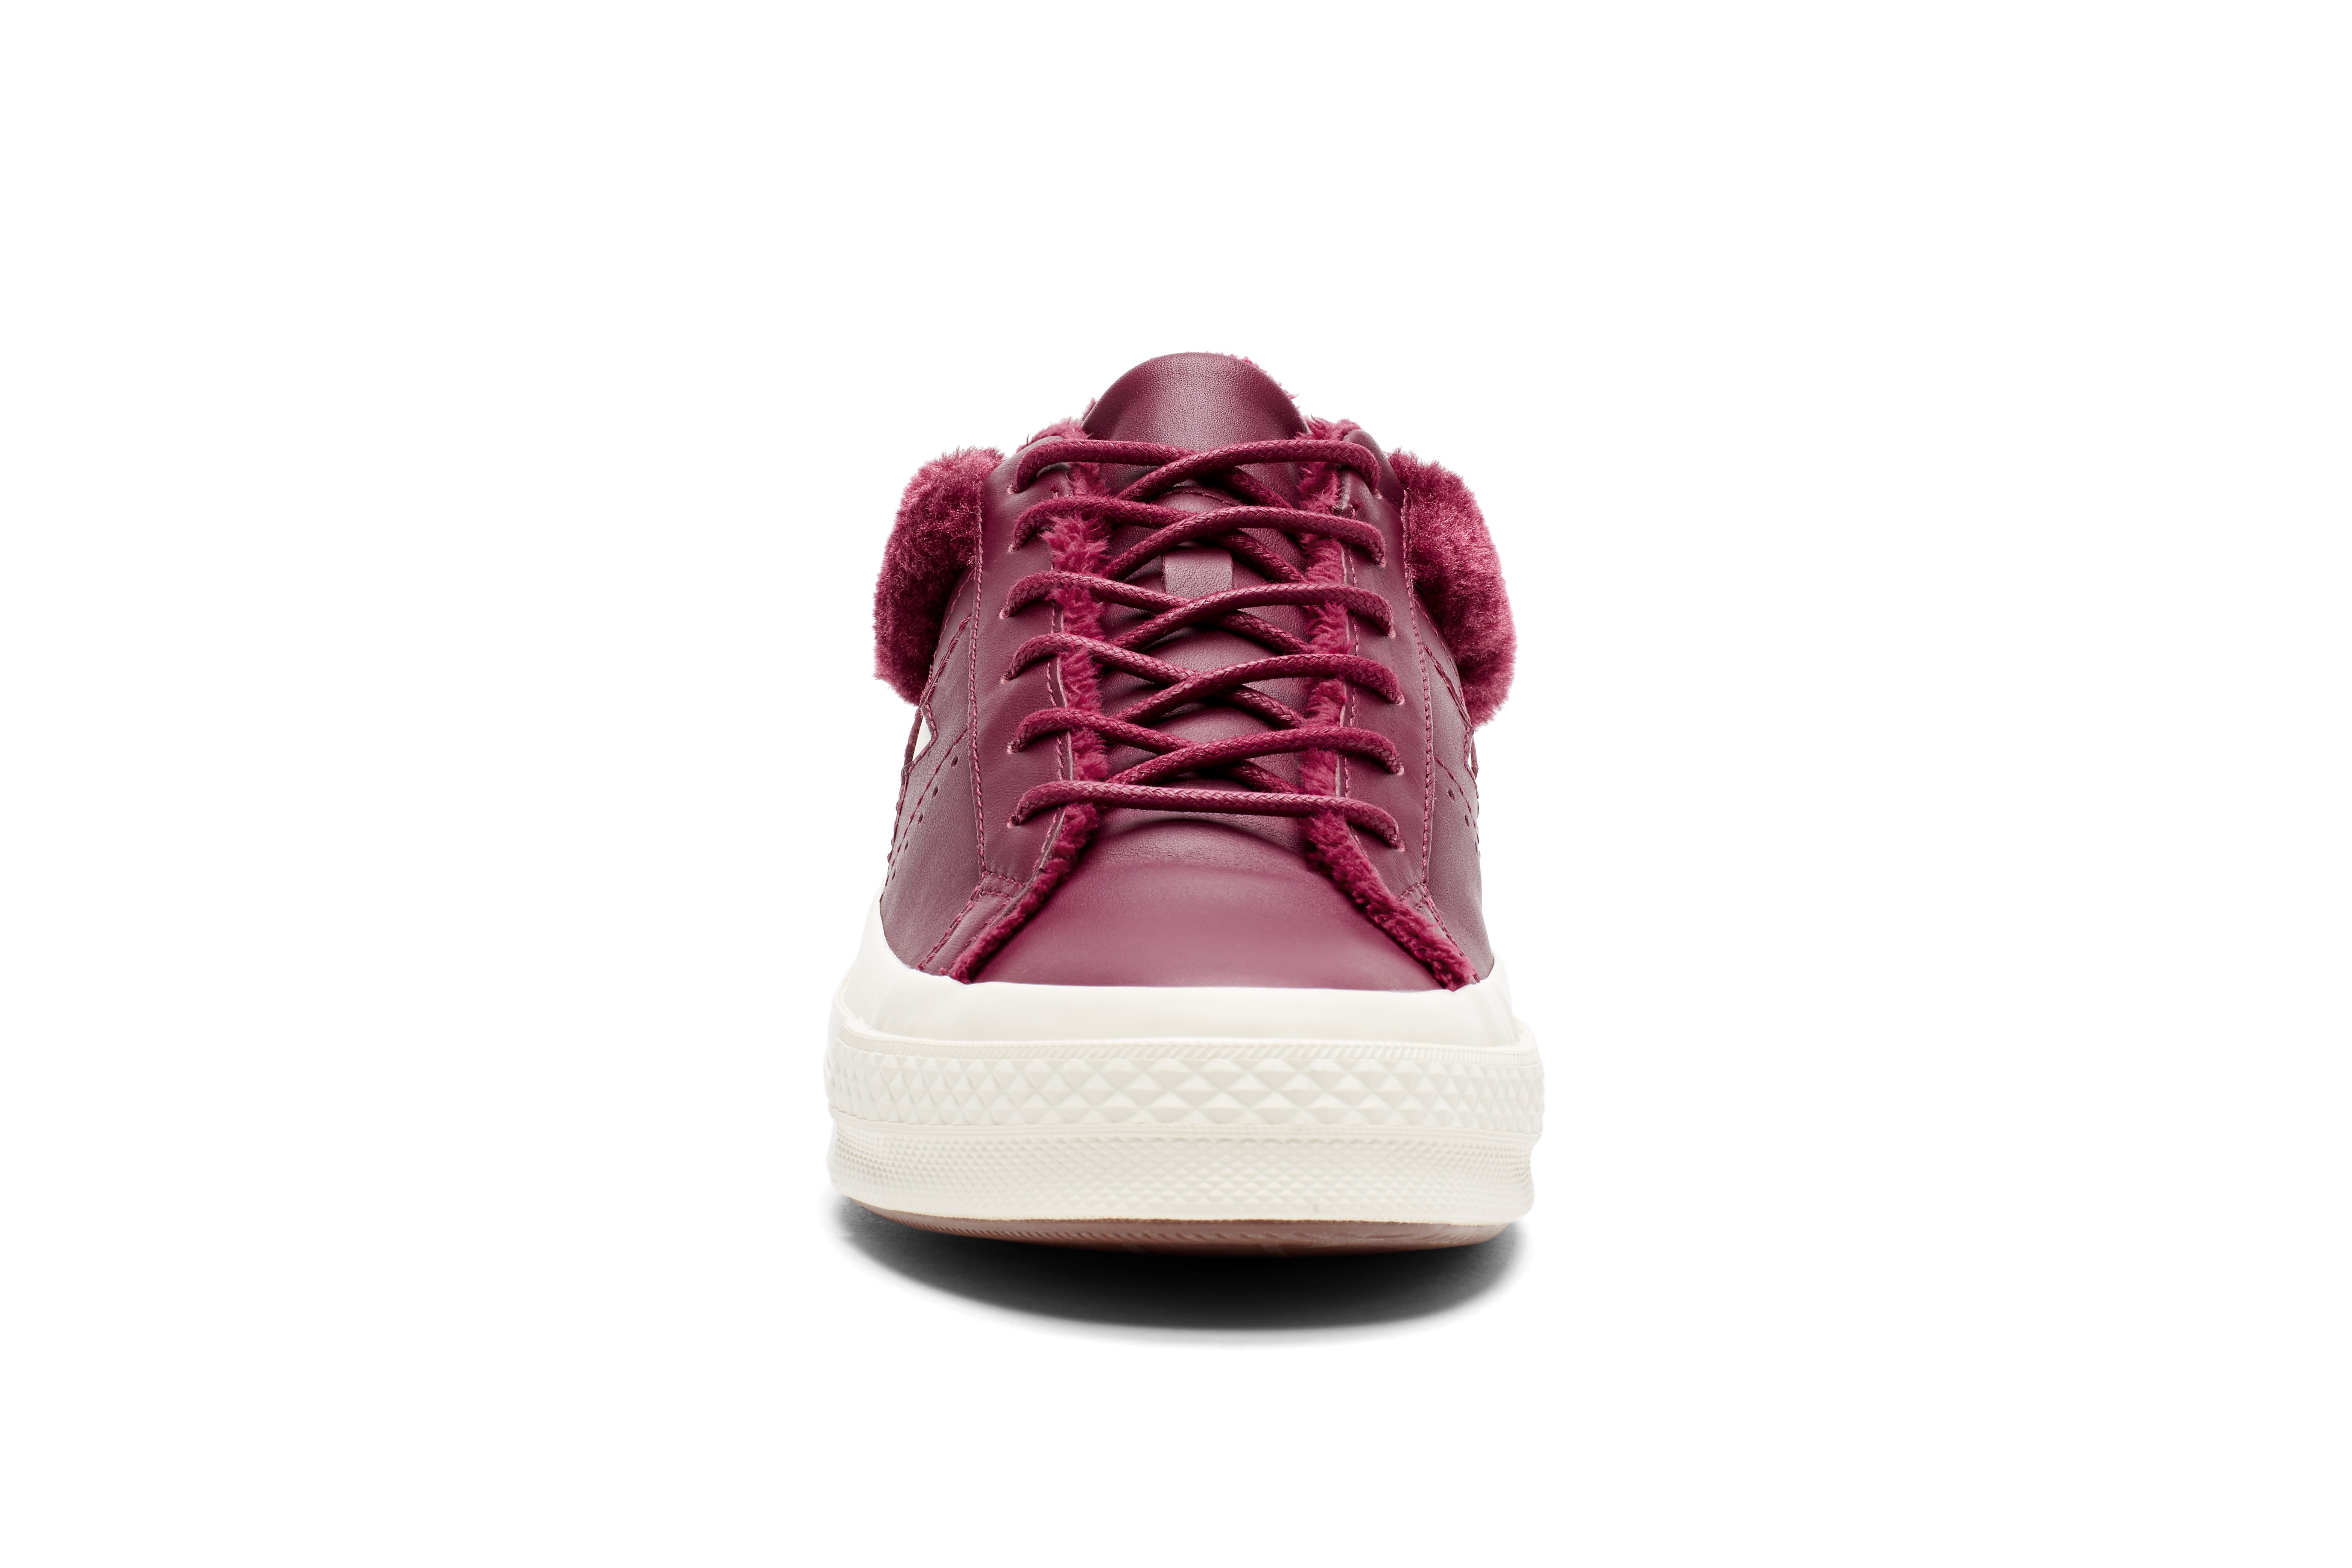 Converse One Star Fur-Lined Maroon and Black Sneaker Shoe 